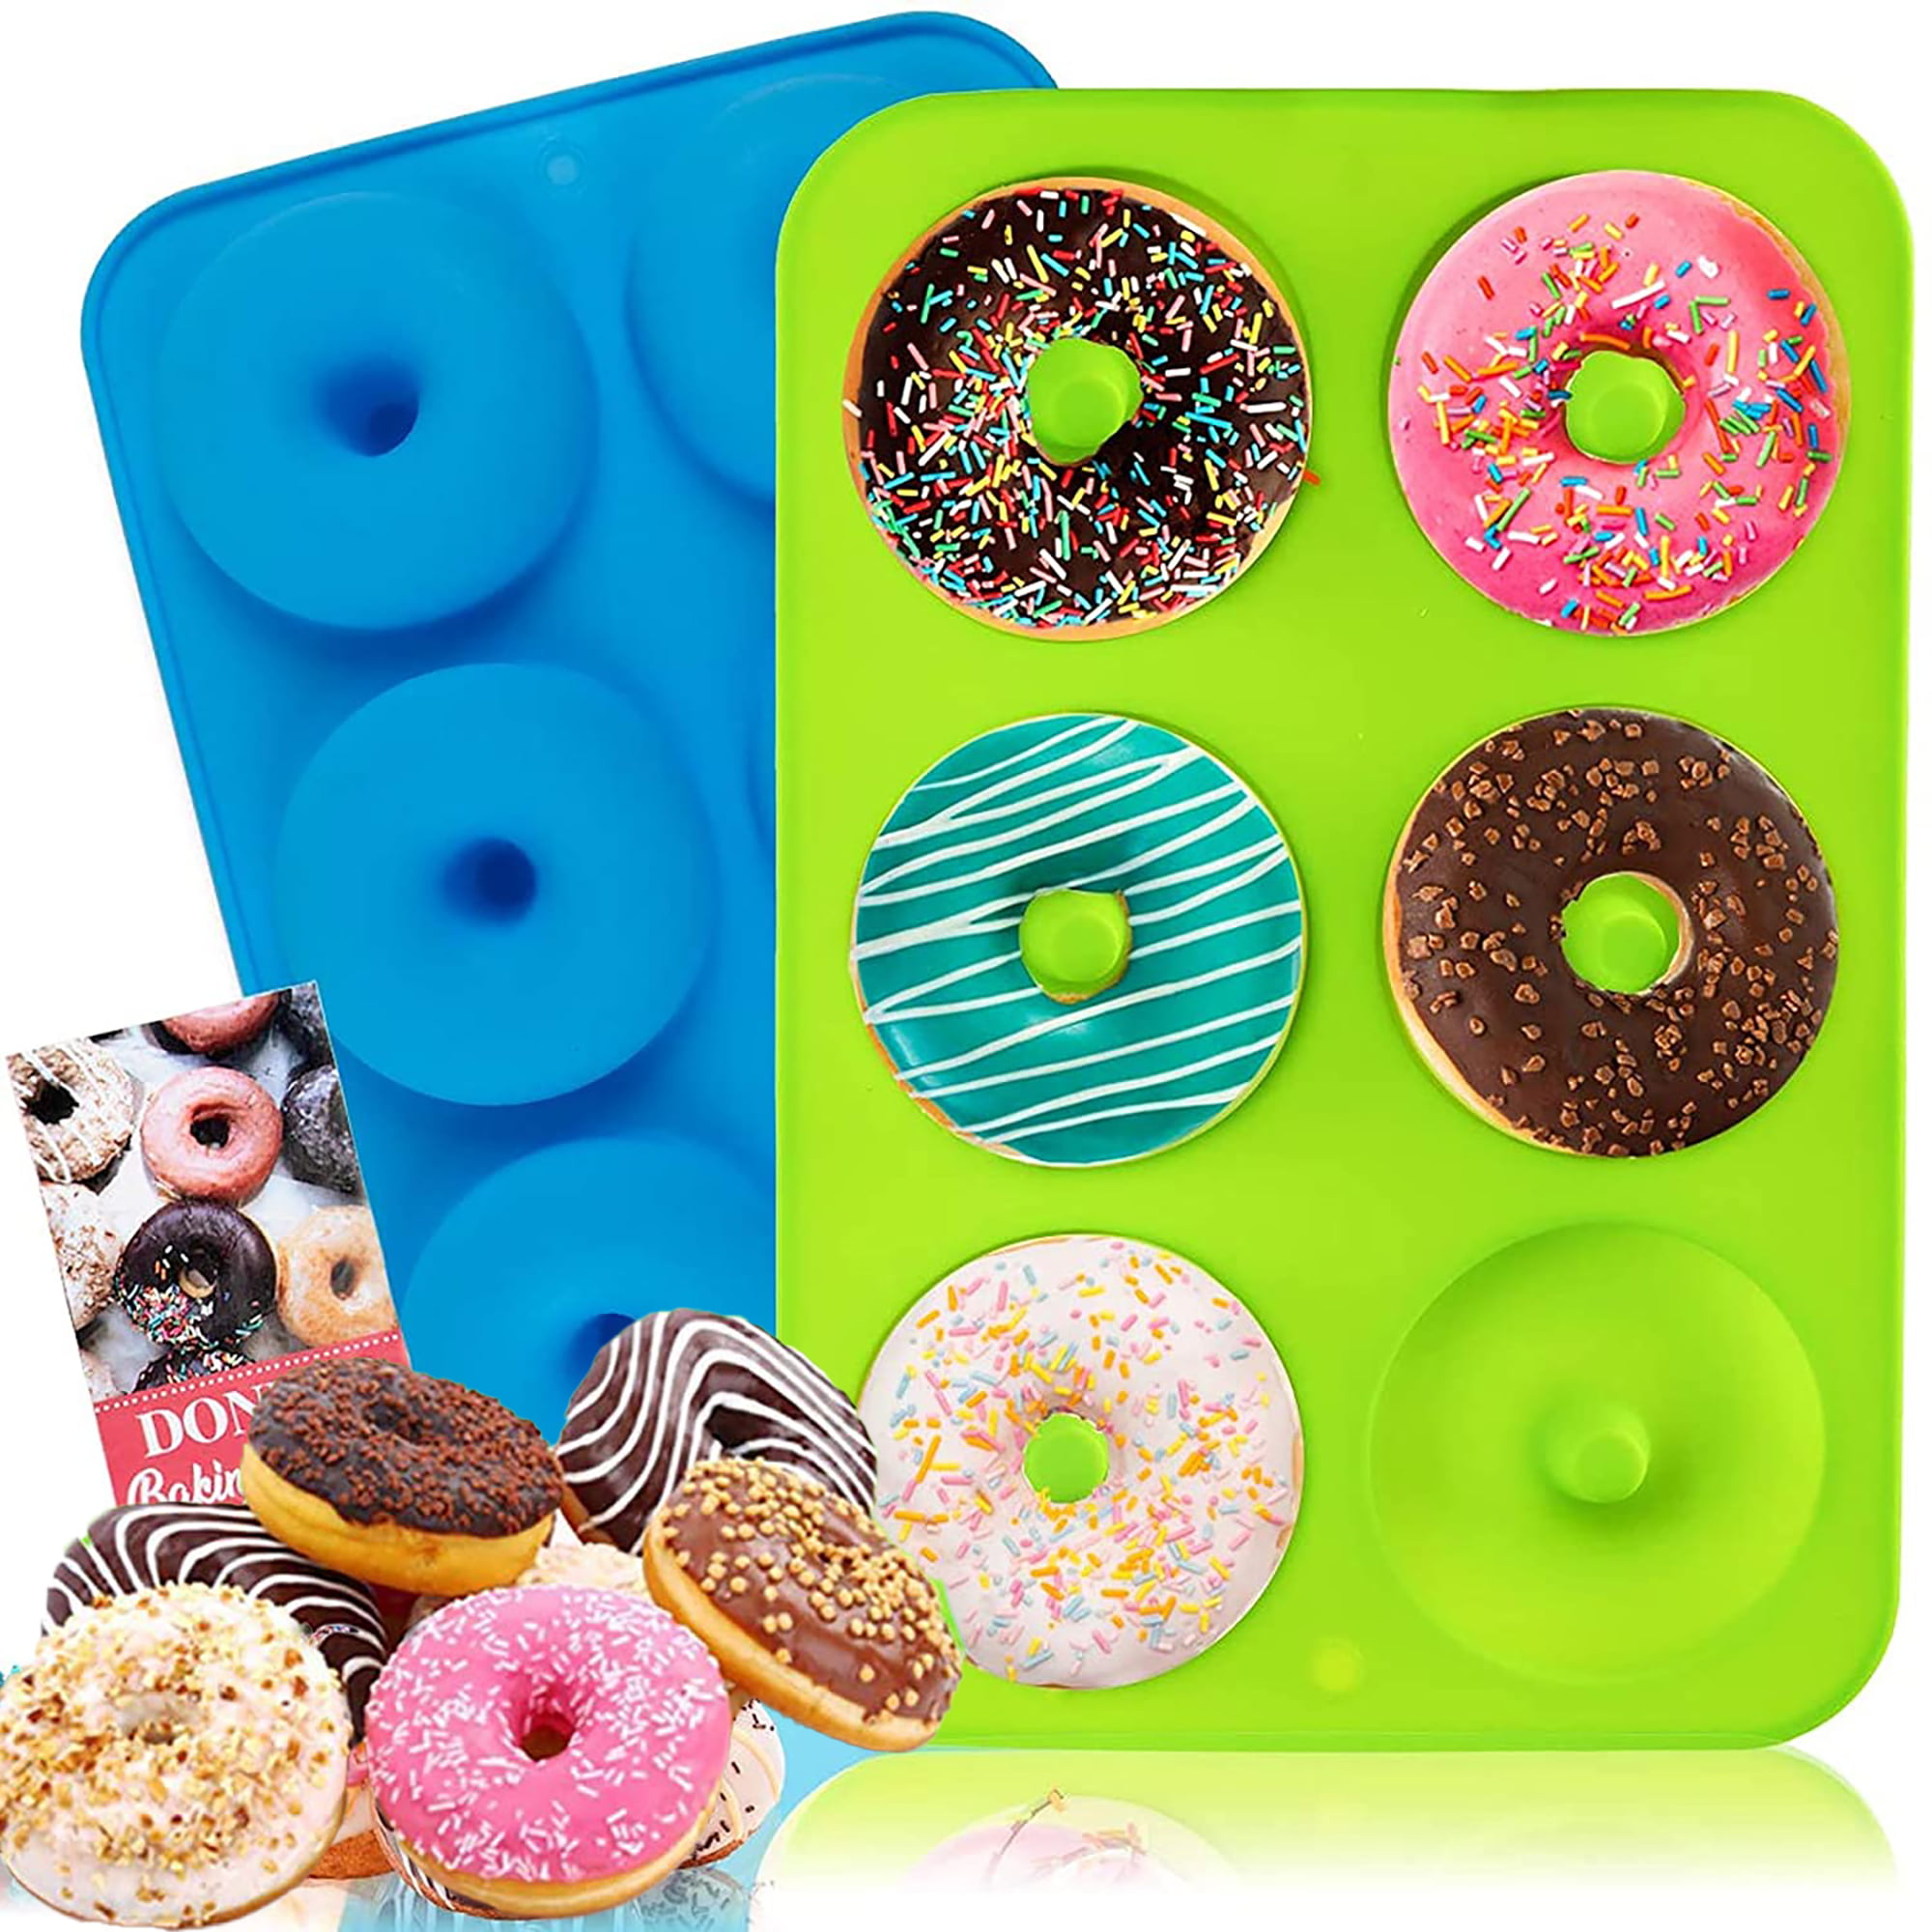 BiaoGan Silicone Donut Baking Pans 6-Cavity Silicone Donut Baking Trays for 3 Inch Doughnuts 3 Pack Non-Stick Silicone Donut Molds Bagels Red, Green, Blue 